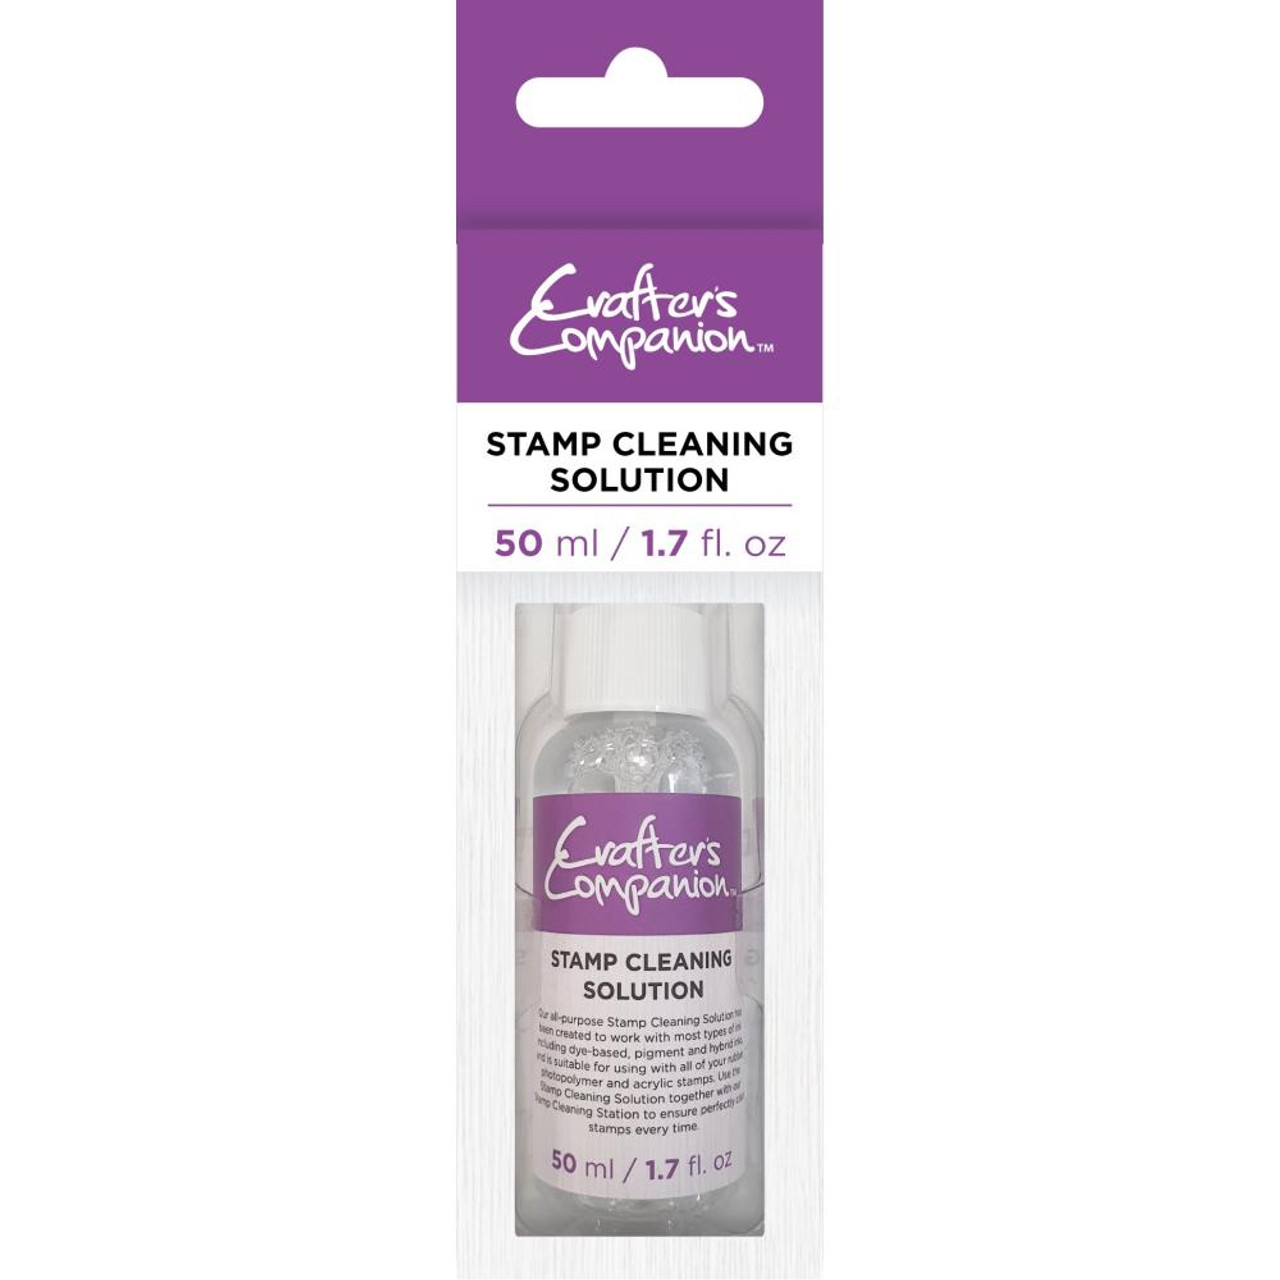 Crafter's Companion - Stamp Cleaning Station